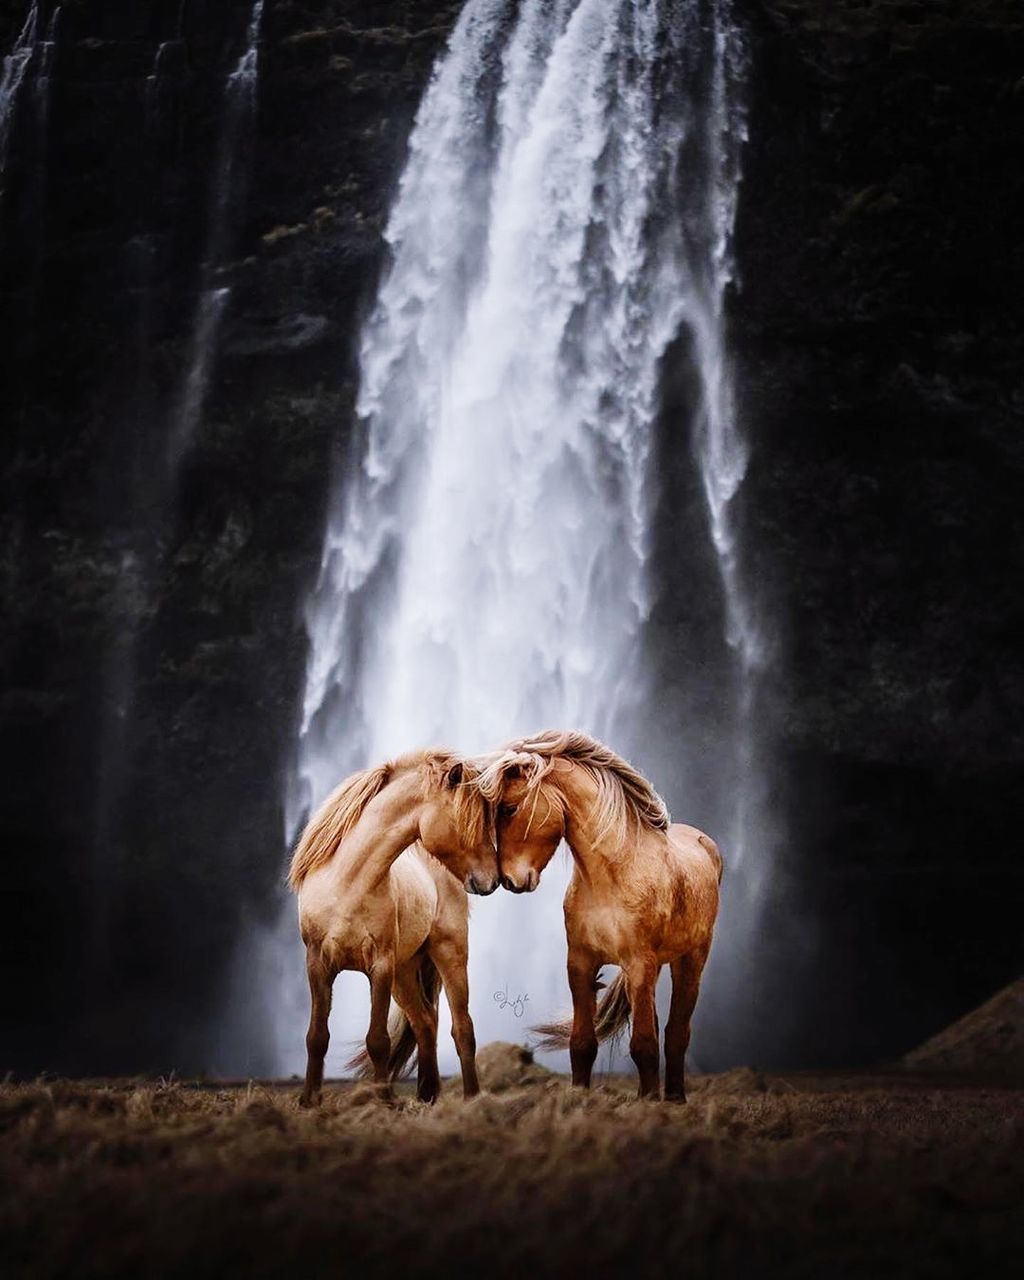 mammal, animal themes, group of animals, animal, domestic animals, waterfall, motion, two animals, land, vertebrate, animal wildlife, livestock, domestic, standing, pets, water, no people, nature, day, horse, flowing water, herbivorous